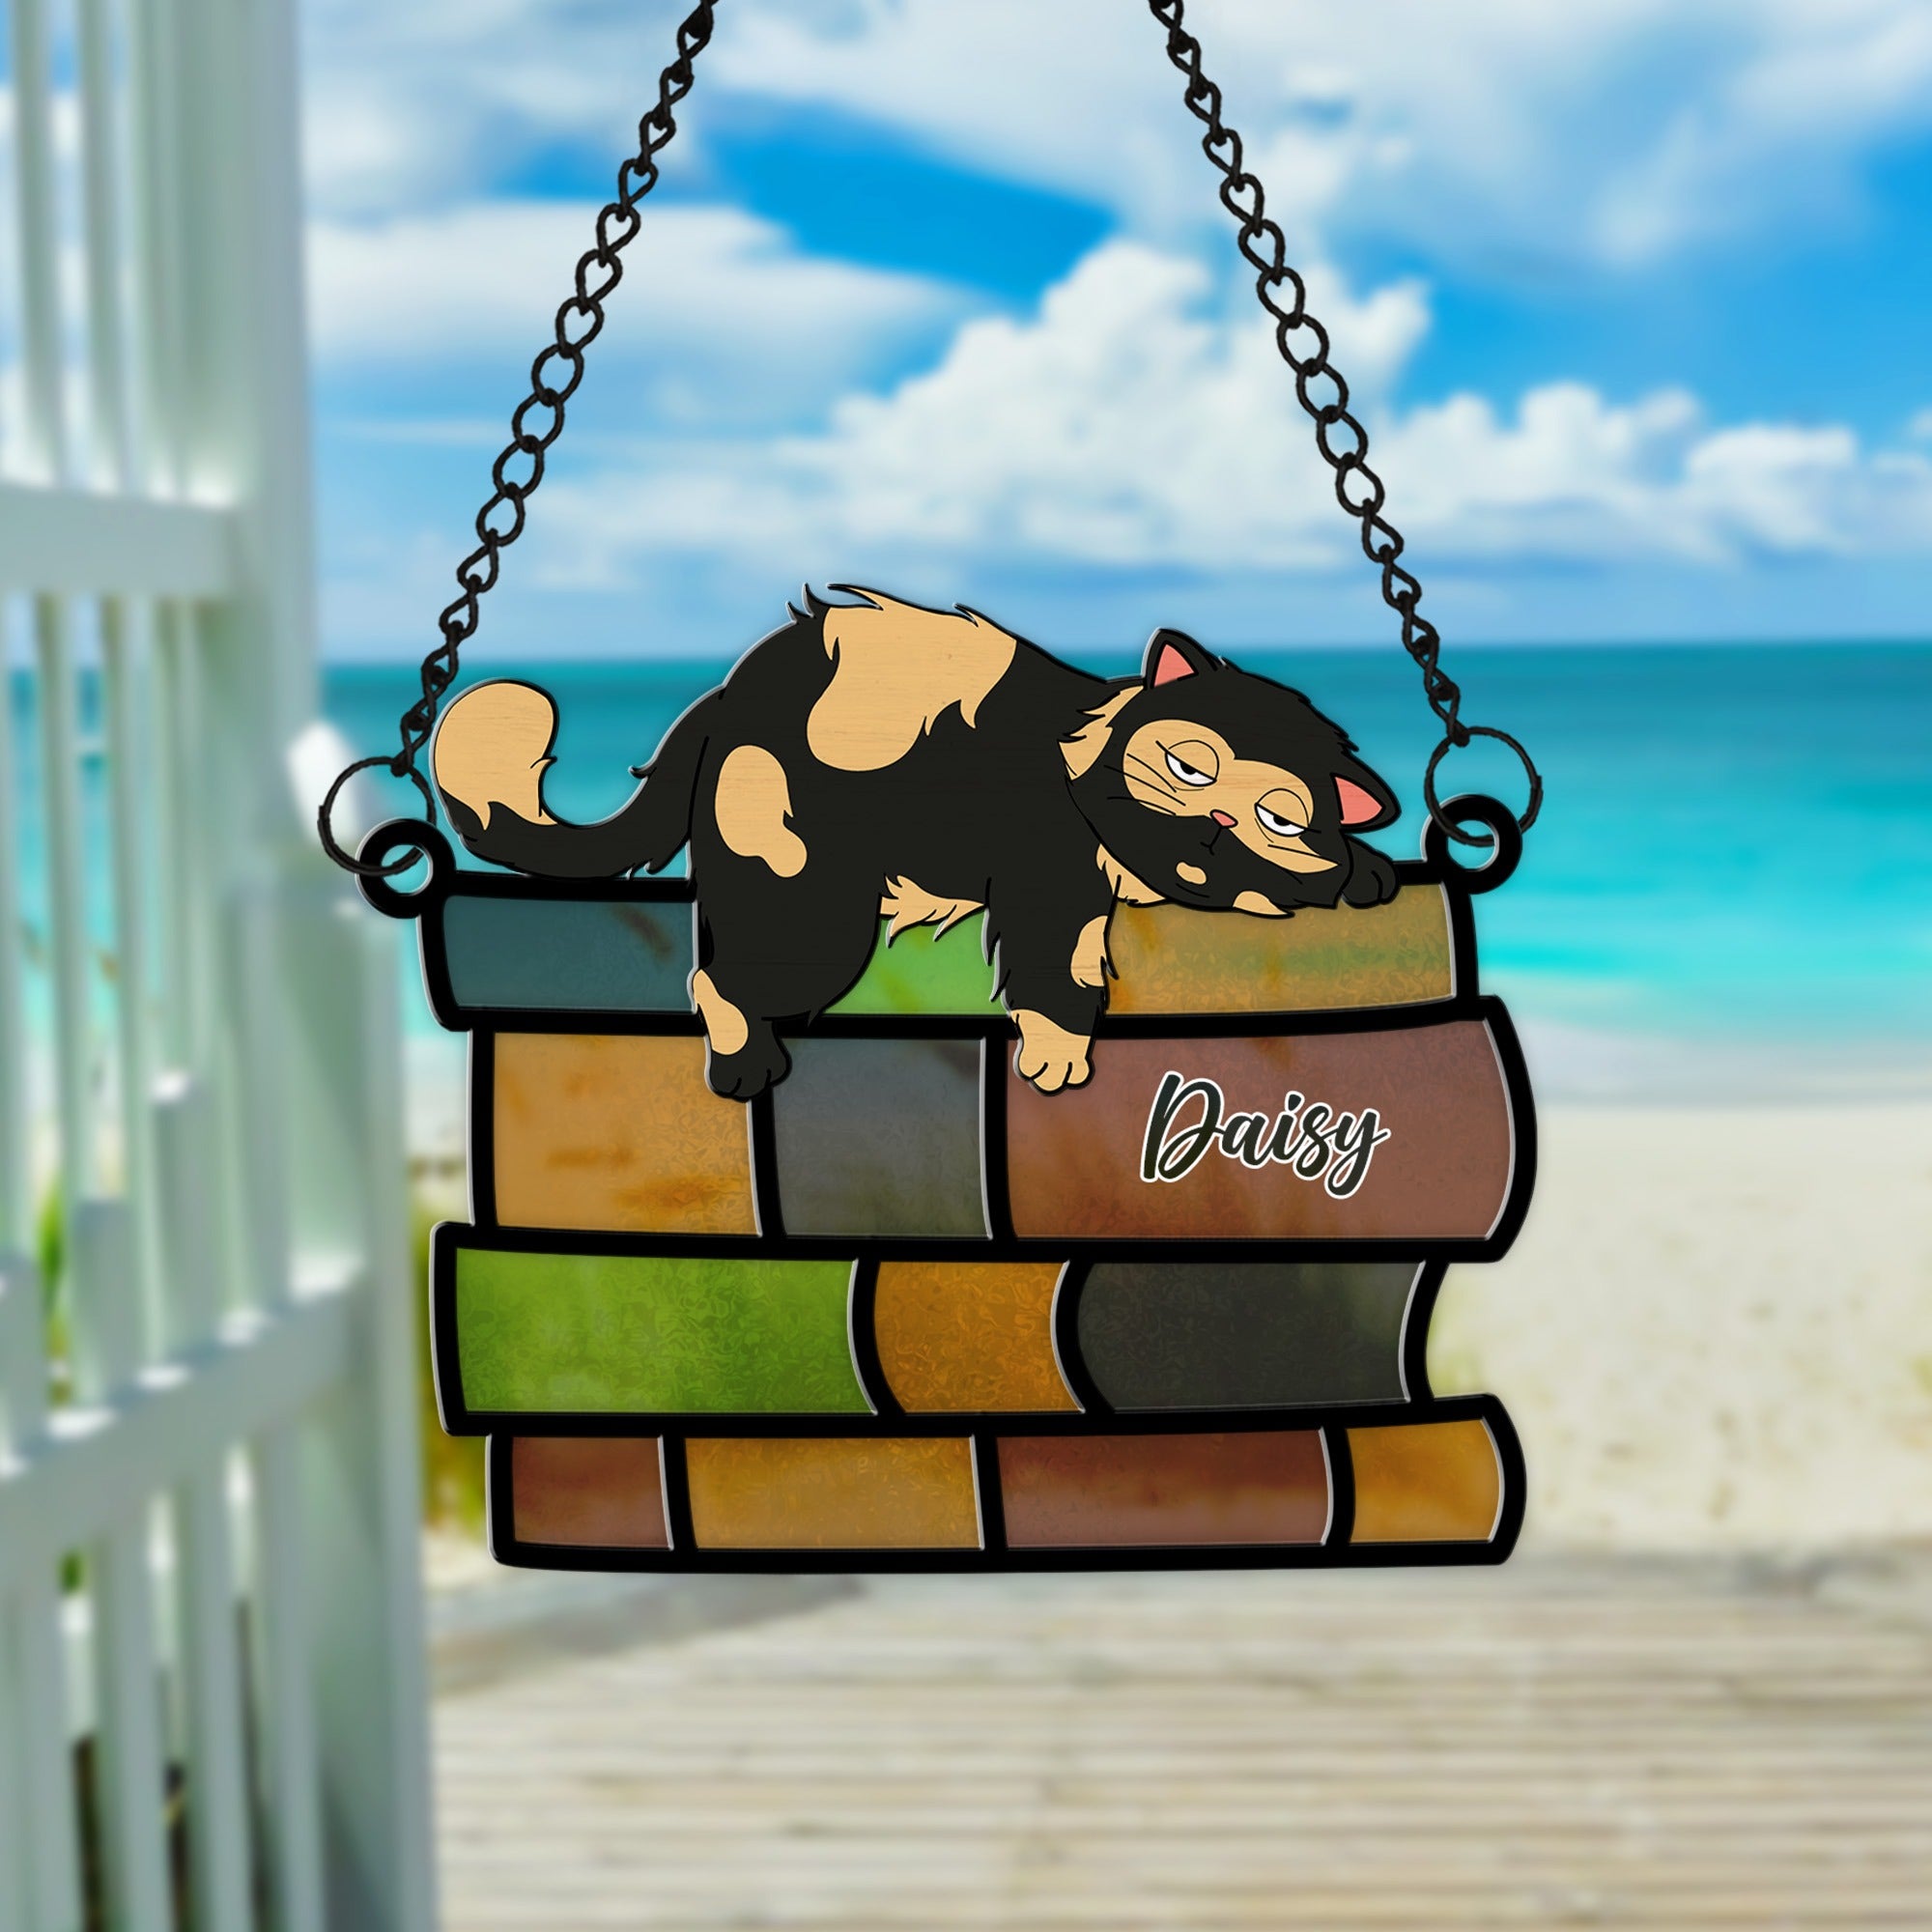 Personalized Lazy Cat Sleeping On Pile Of Books Hanging Suncatcher Ornament